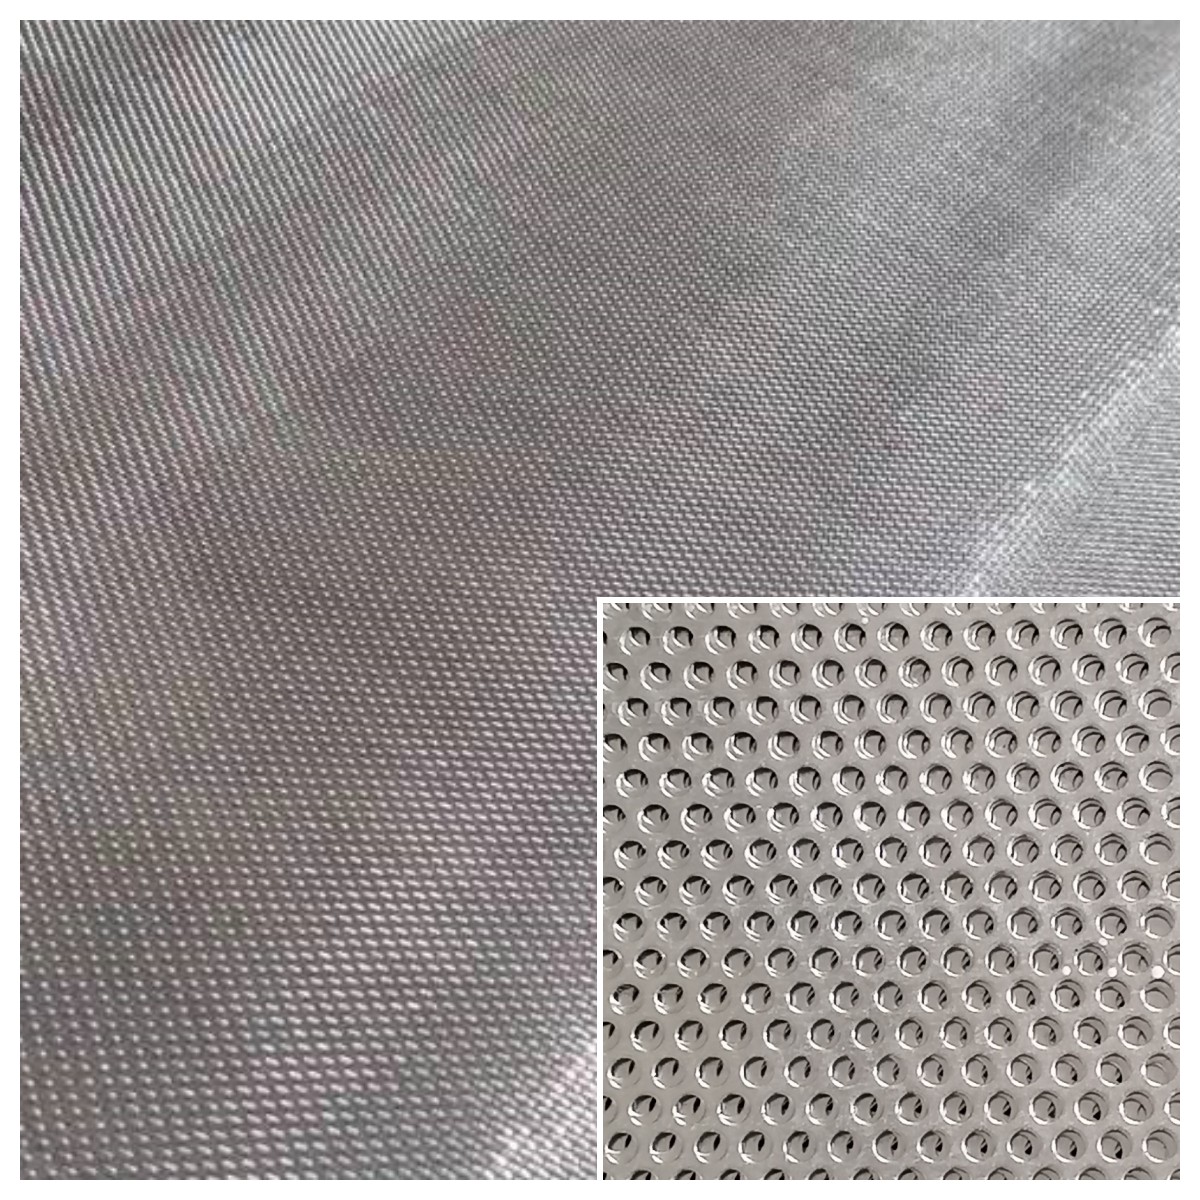 Science of metal mesh｜How to distinguish punched mesh and woven mesh?